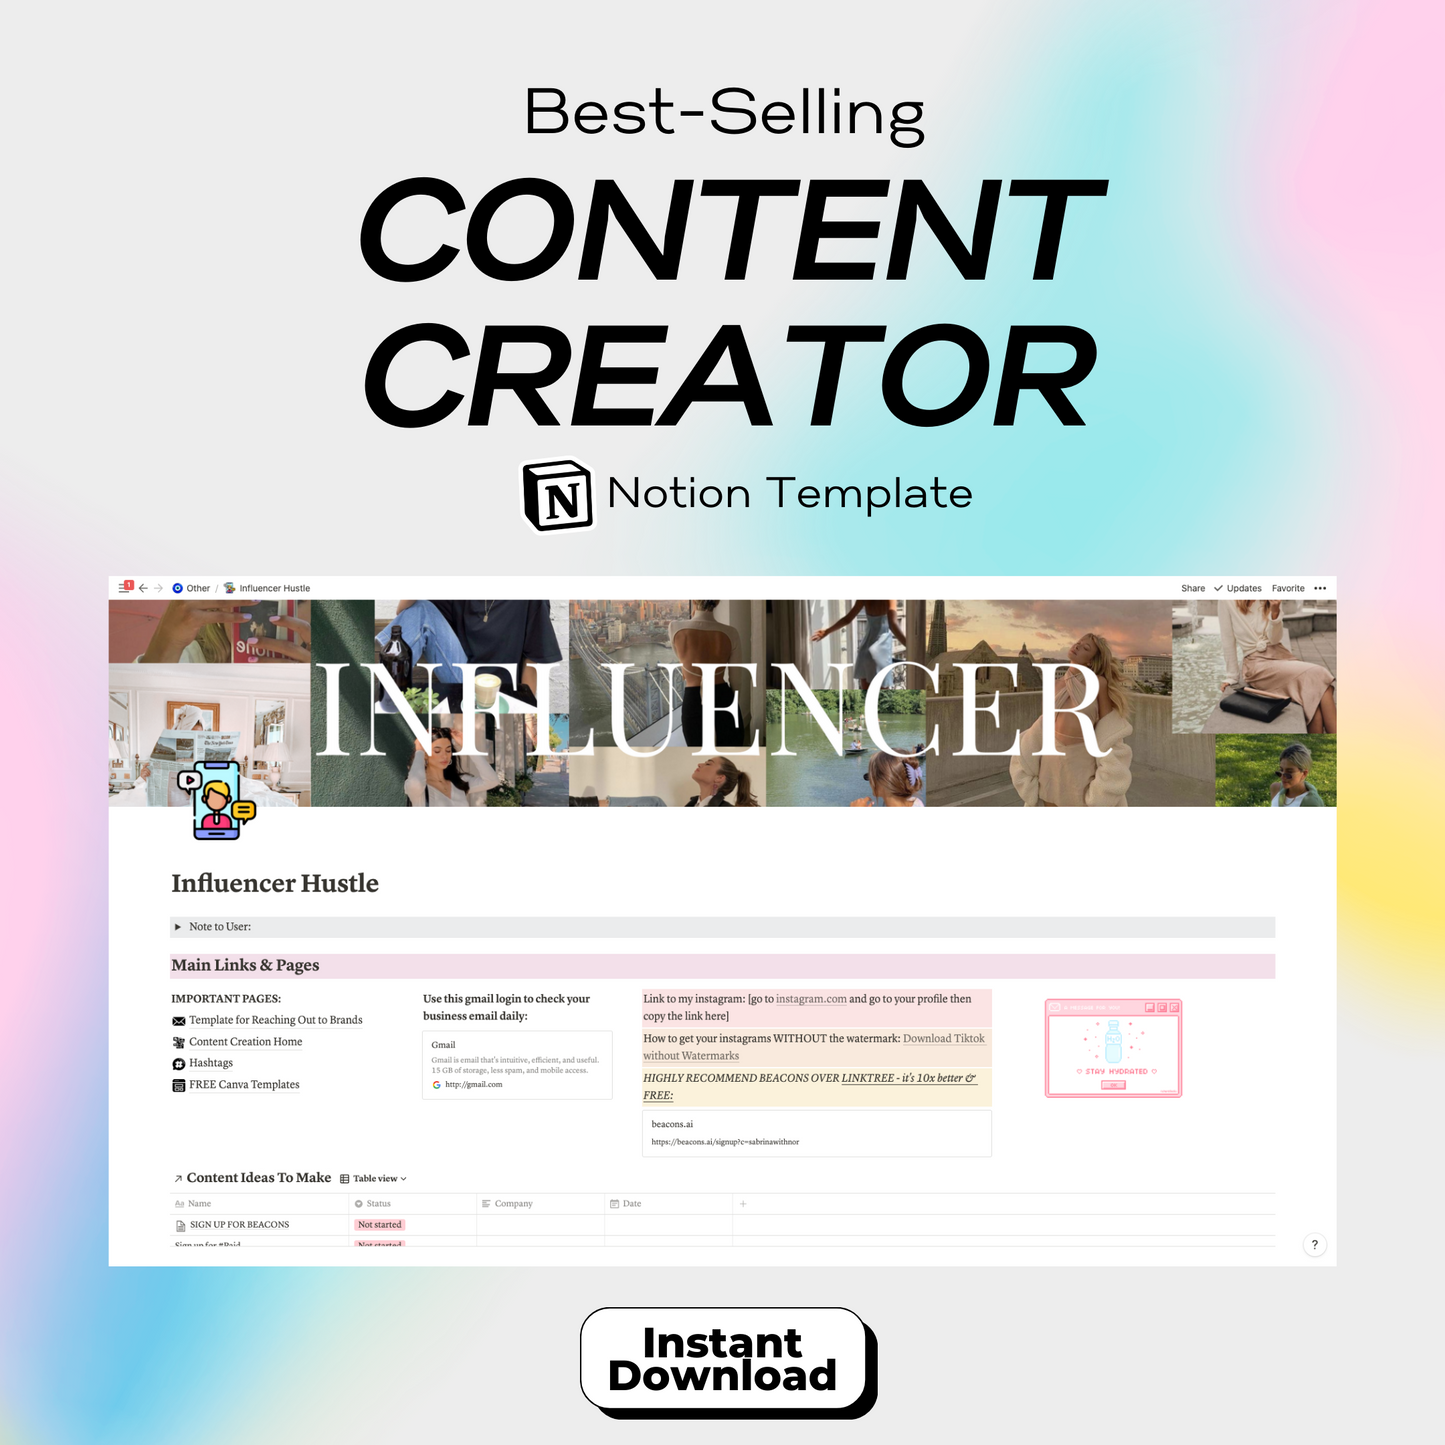 Content Creator Notion Template